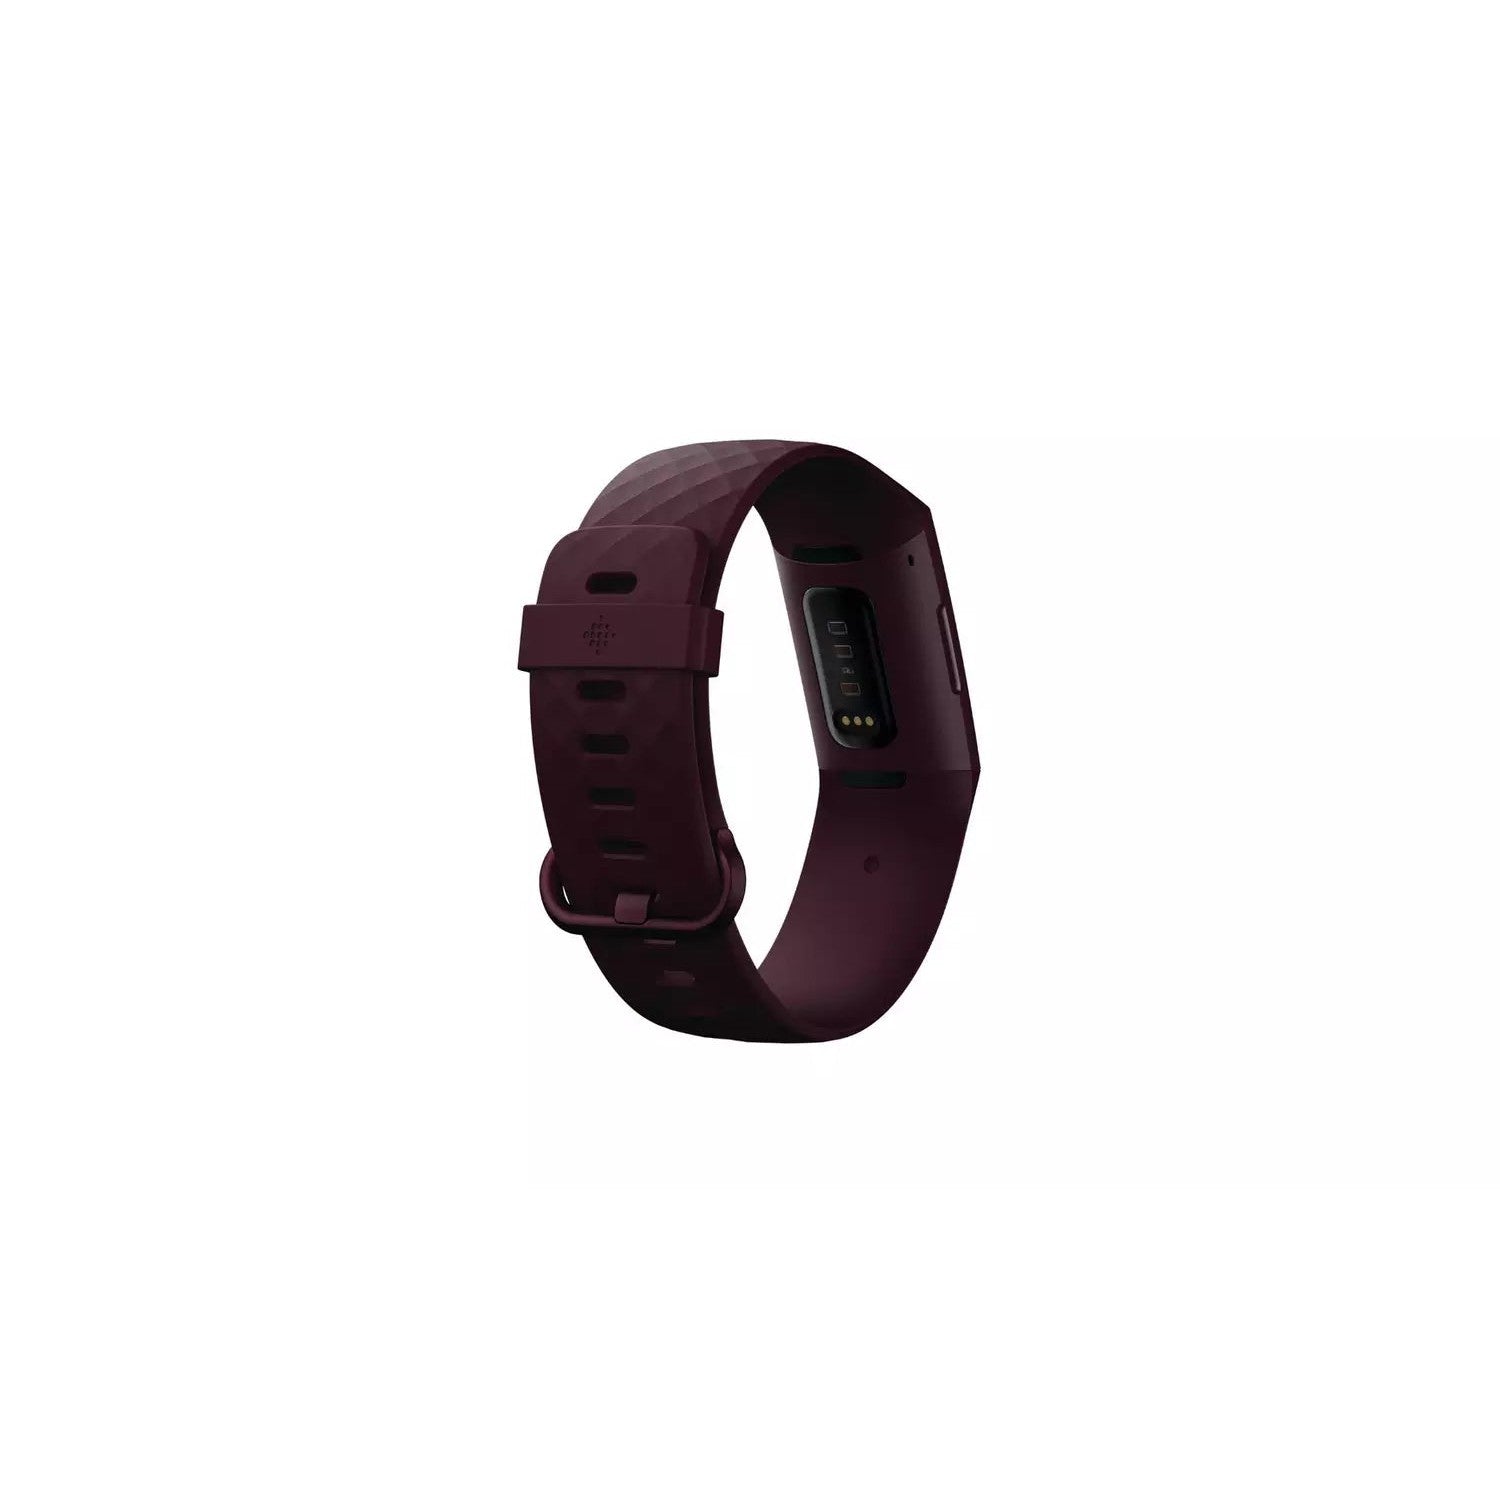 Fitbit Charge 4 Advanced Fitness Tracker with GPS - Rosewood - Refurbished Good - No Strap